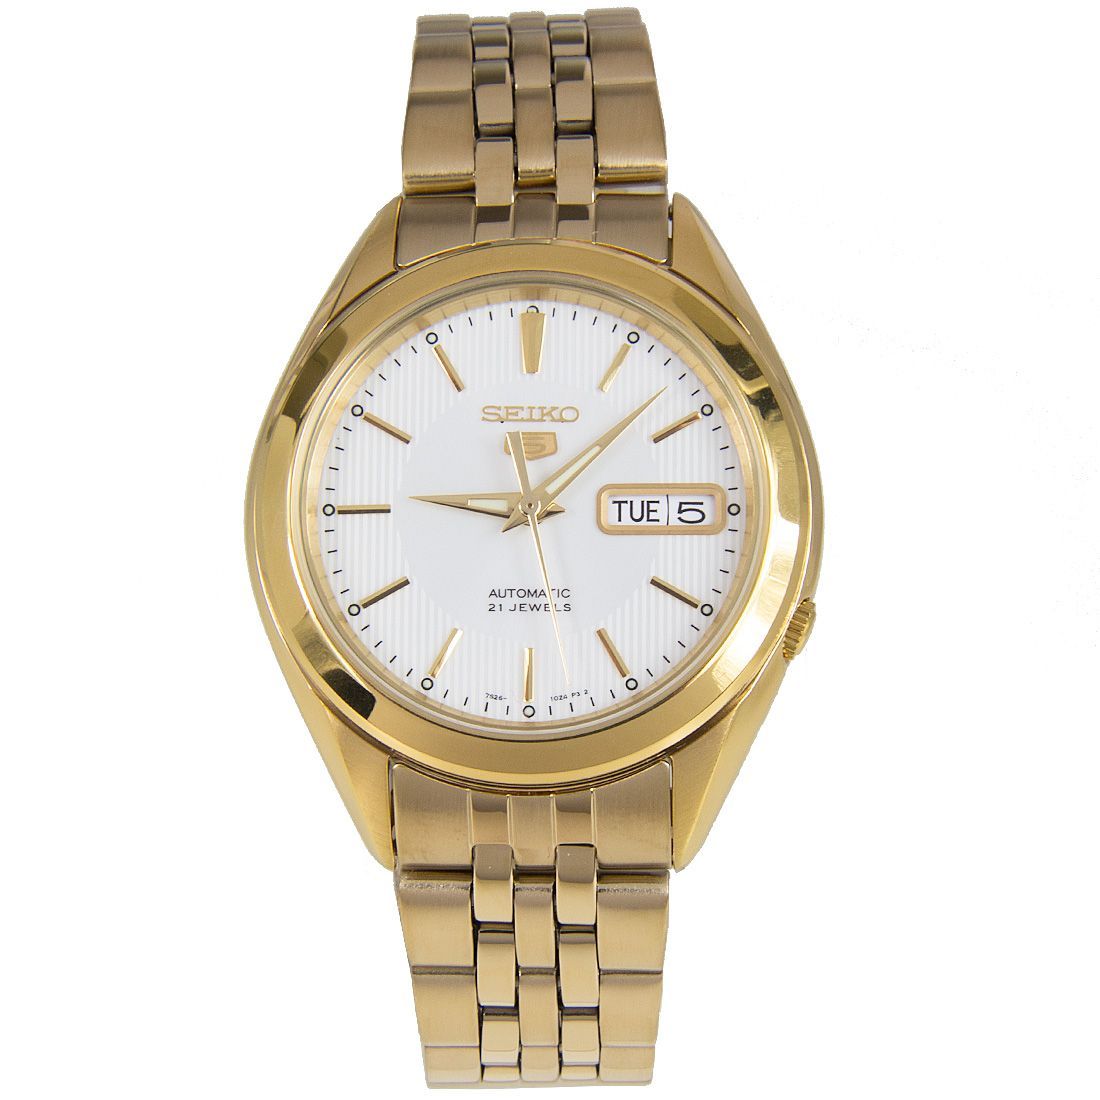 Seiko 5 Automatic Gold Tone Men's Latest Watch SNKL26 K1 - US SPORT WATCHES  INC